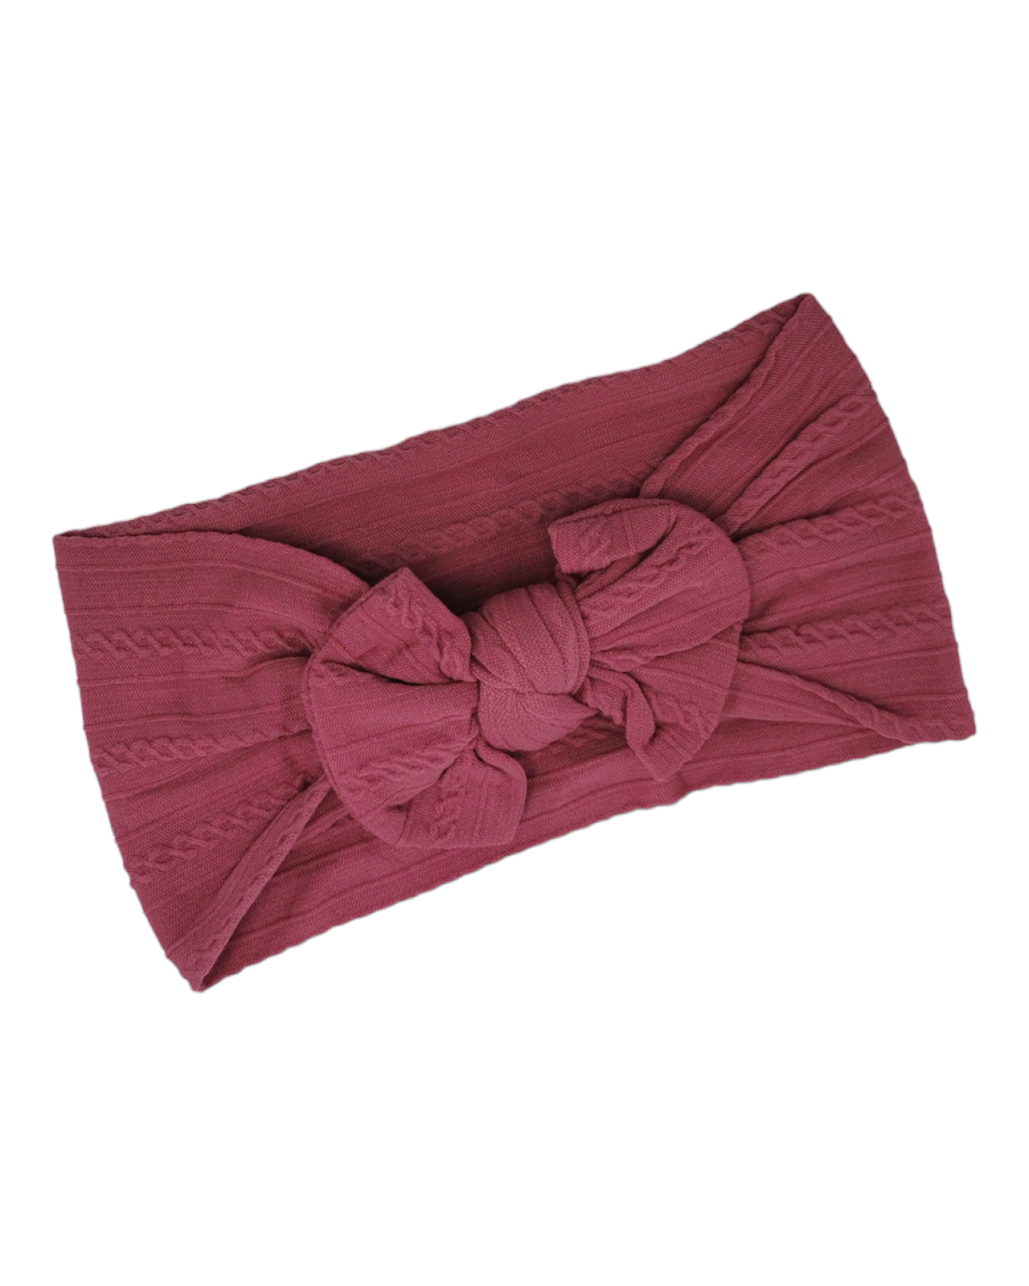 Adult Size - Deep Pink Bow Cable Knit Headwrap - Betty Brown Boutique Ltd